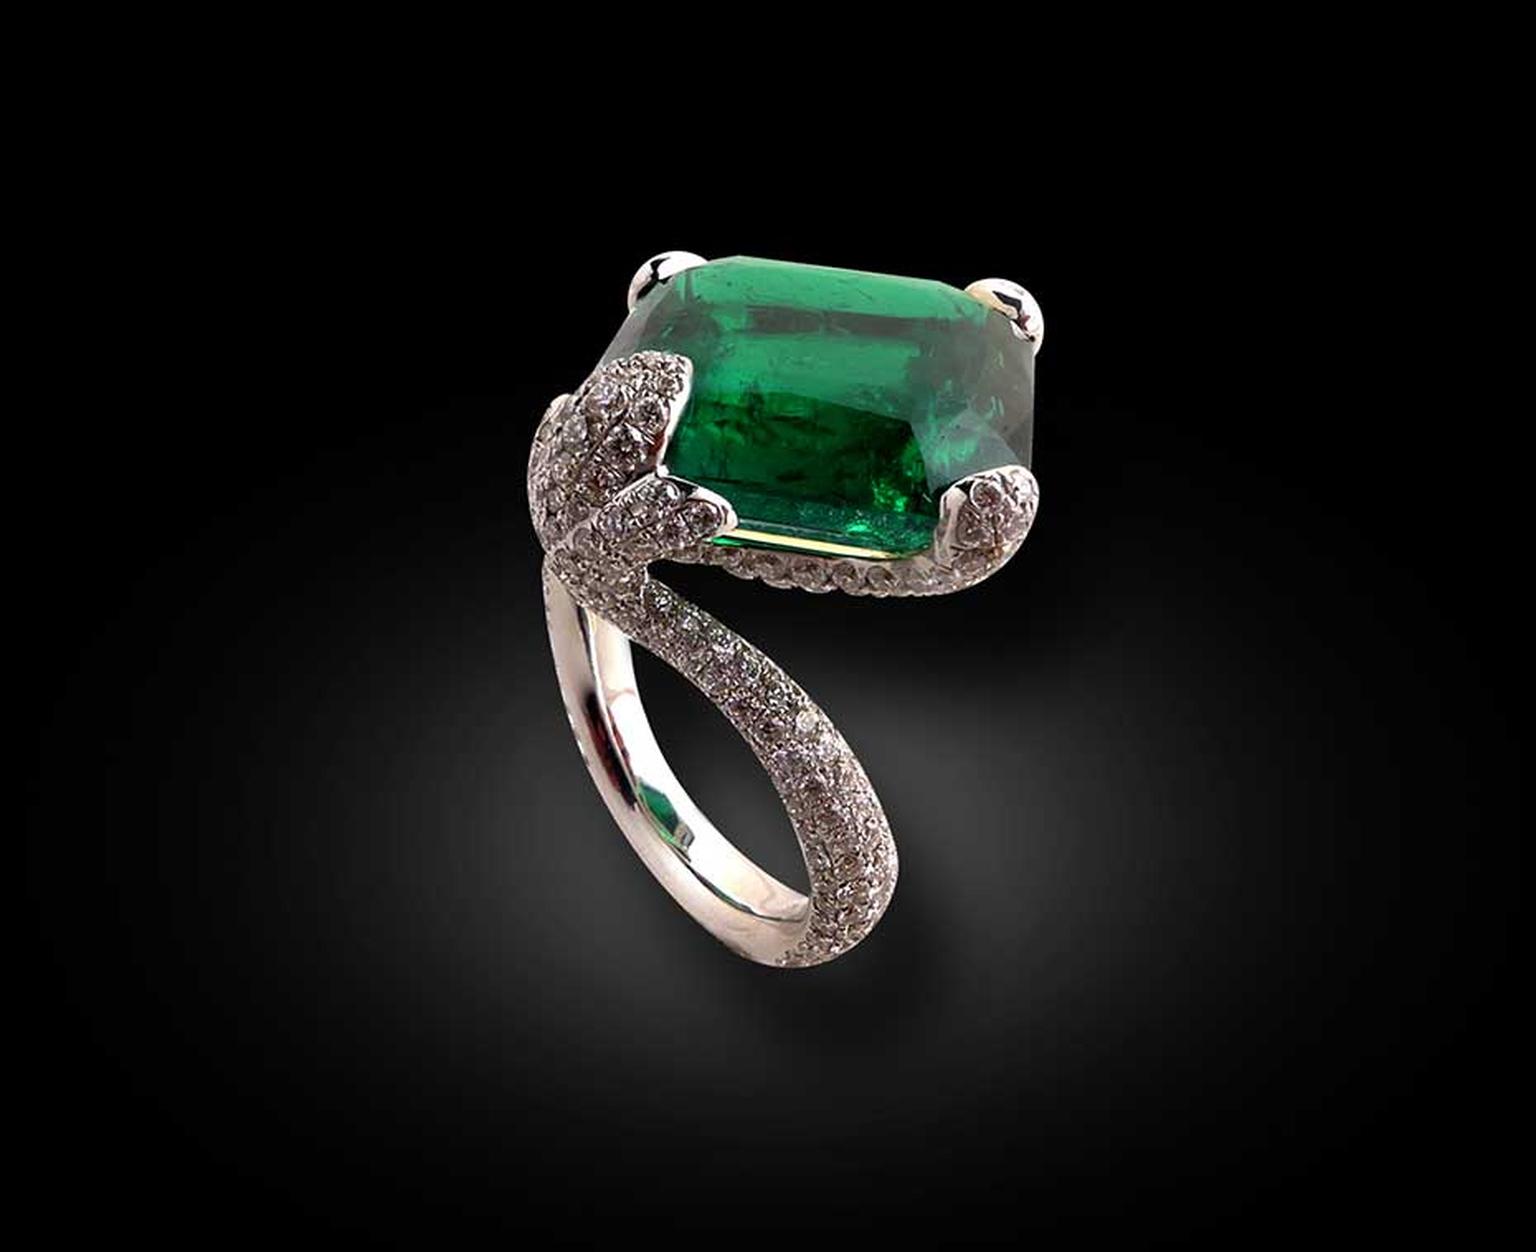 Star Diamond emerald ring, set with a rare 17.49ct Old Mine